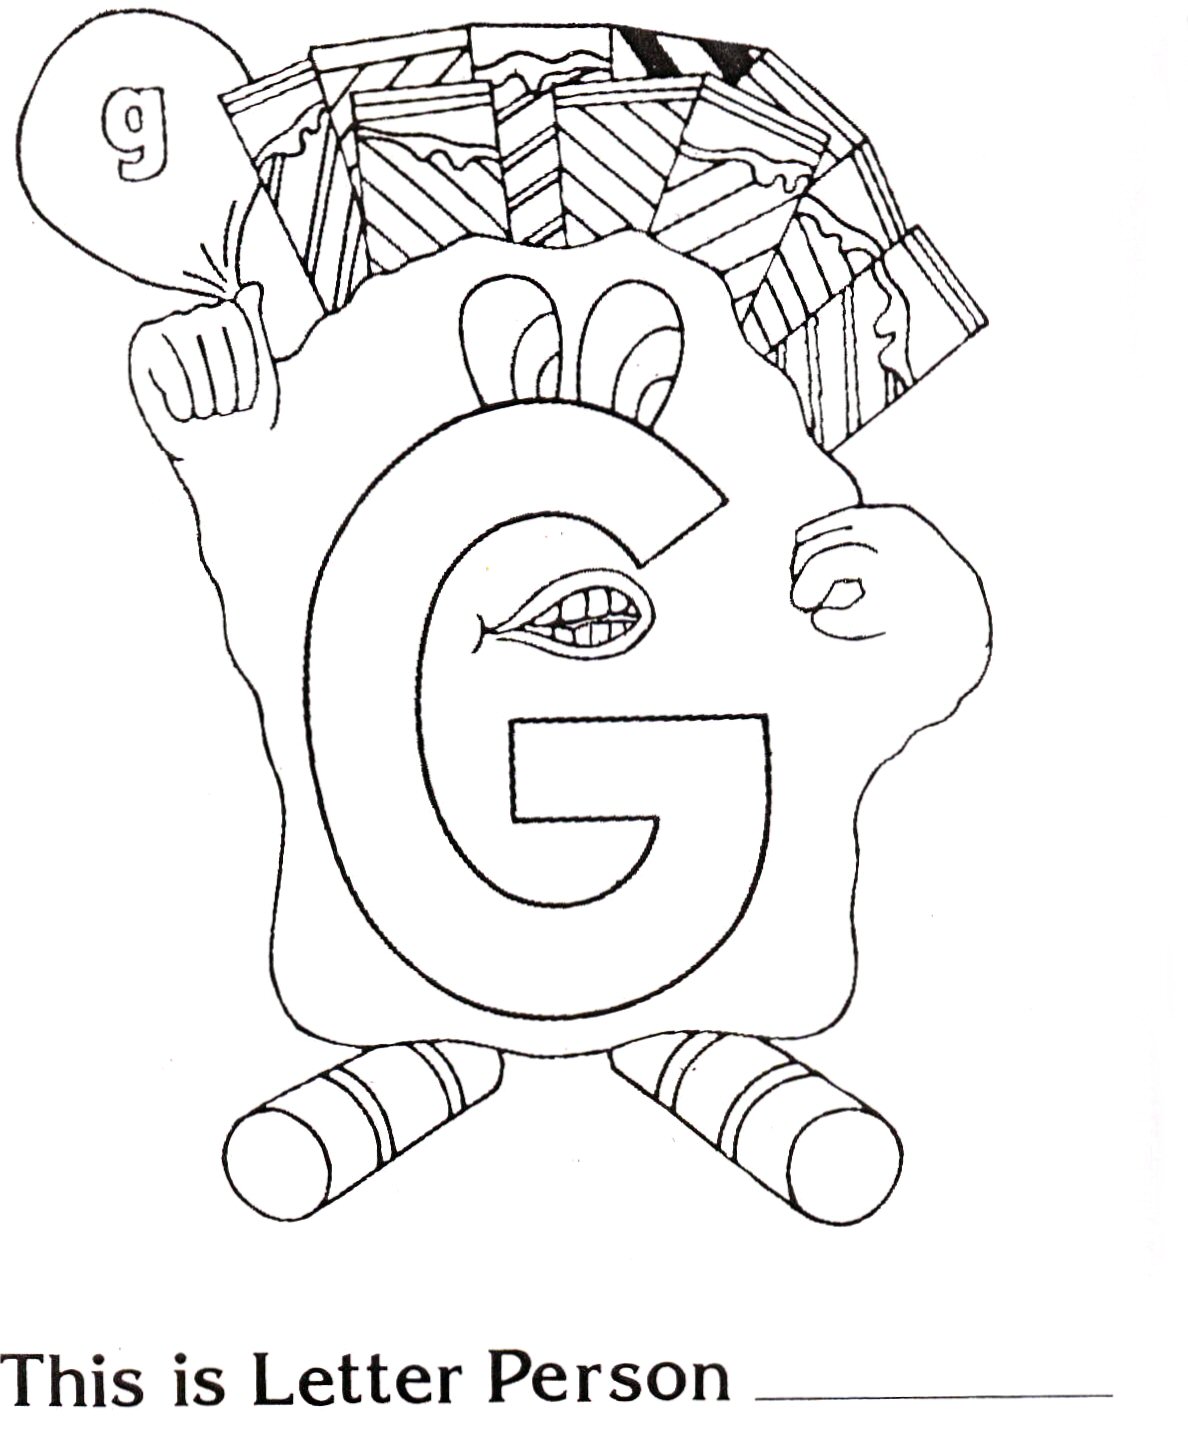 MRG Letter People Coloring Page